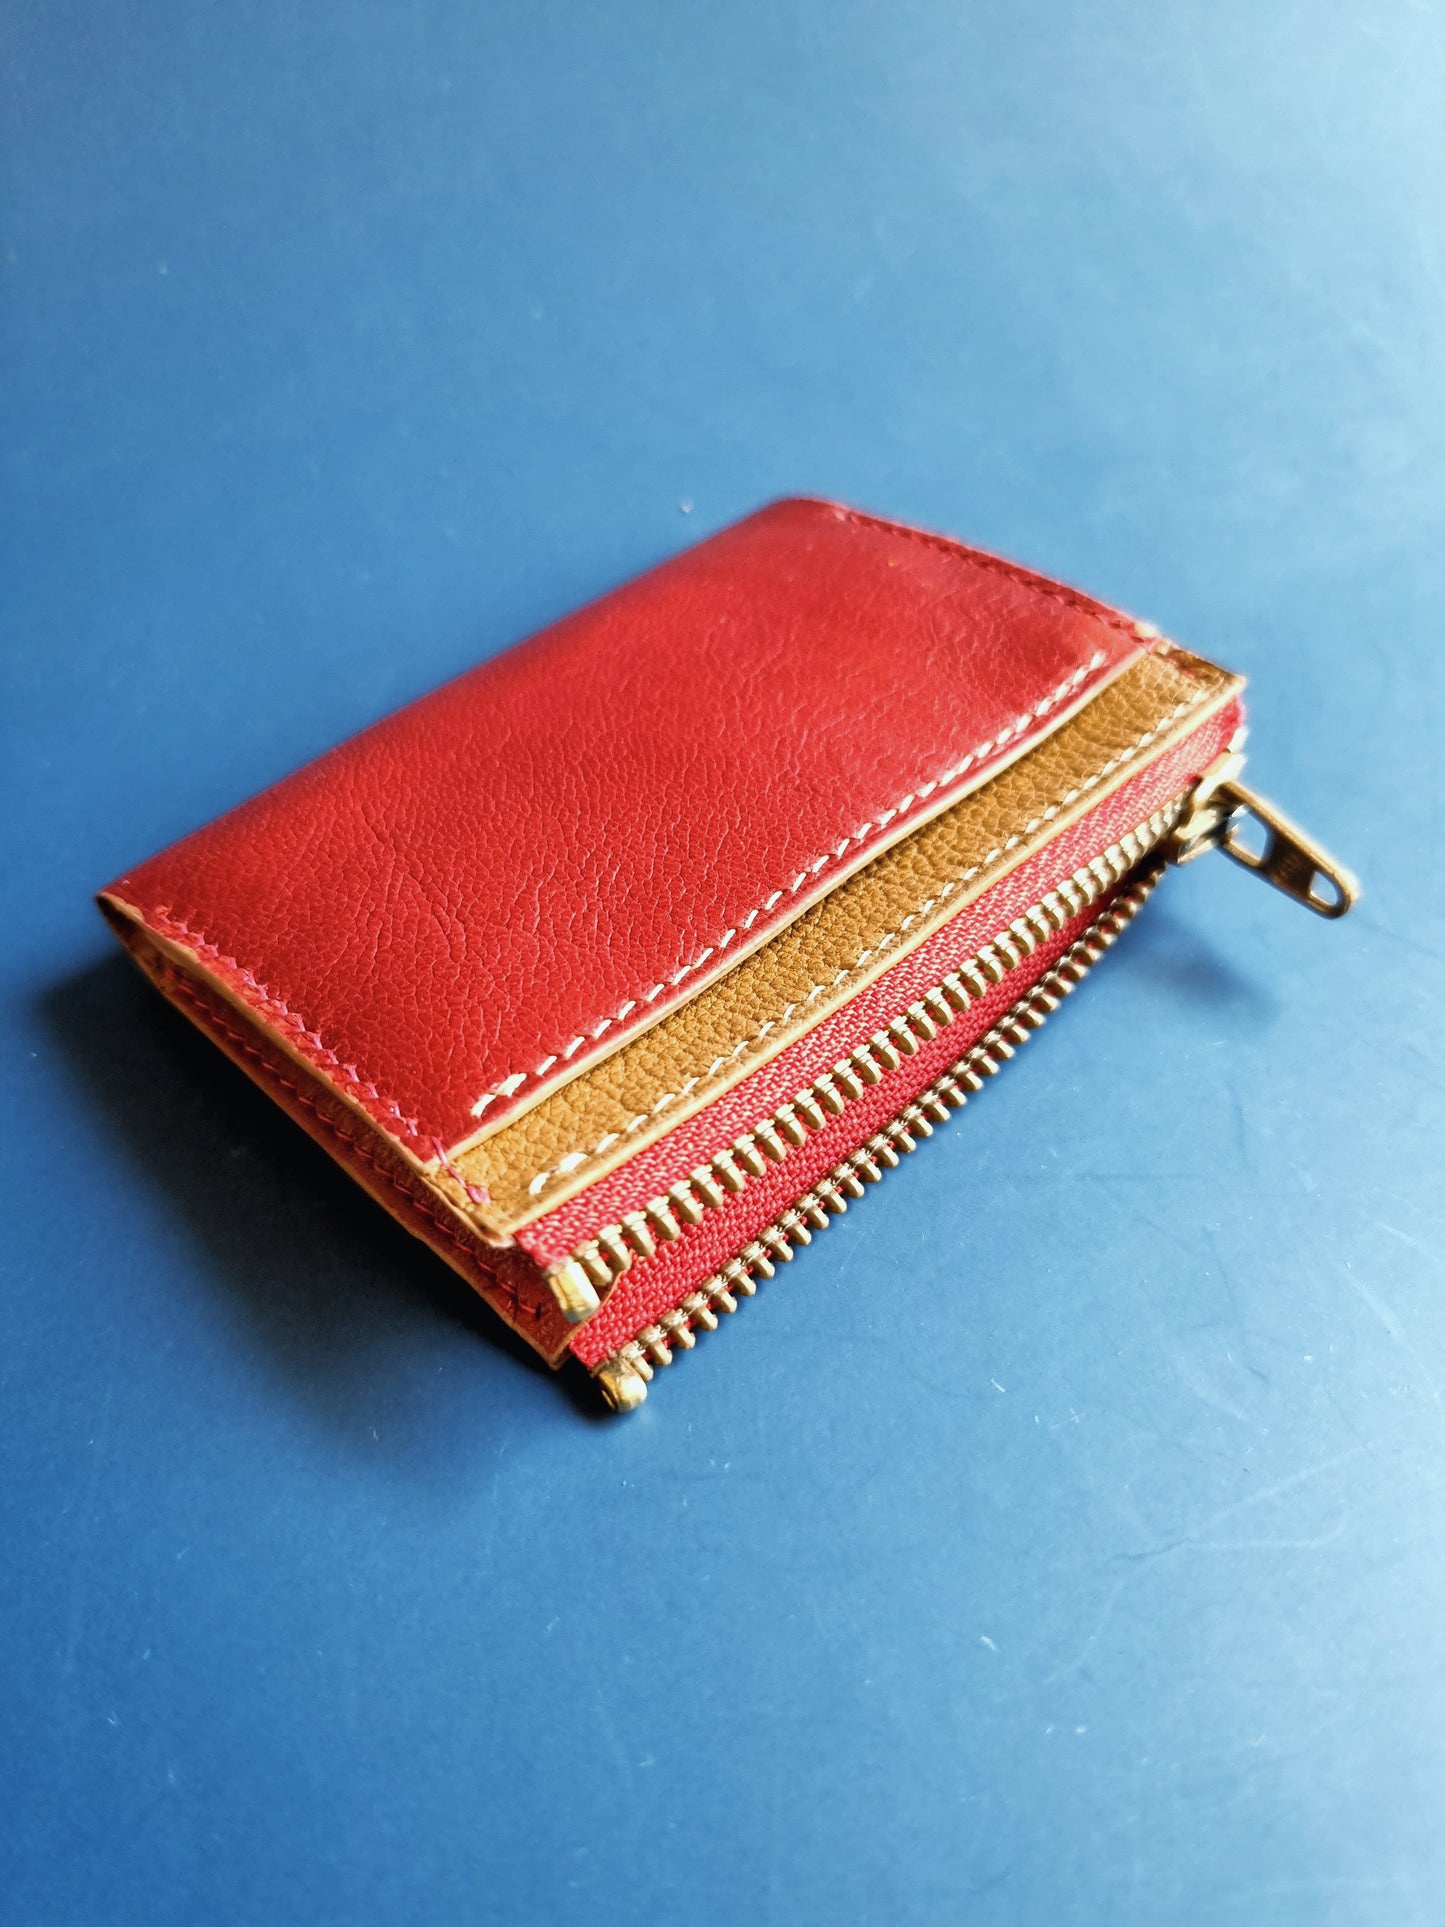 Zipper wallet - limited edition